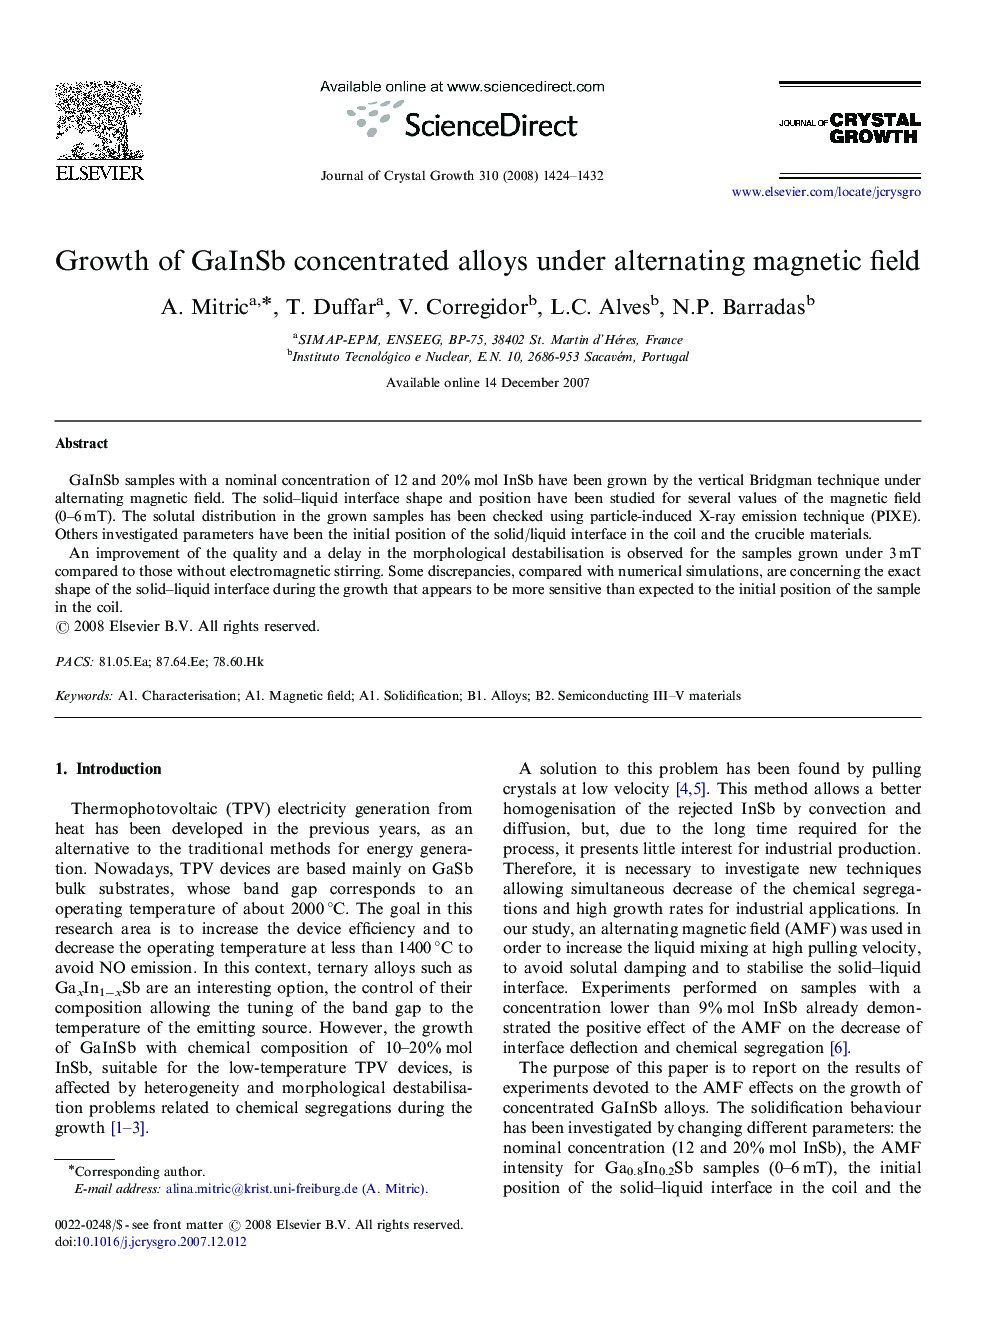 Growth of GaInSb concentrated alloys under alternating magnetic field